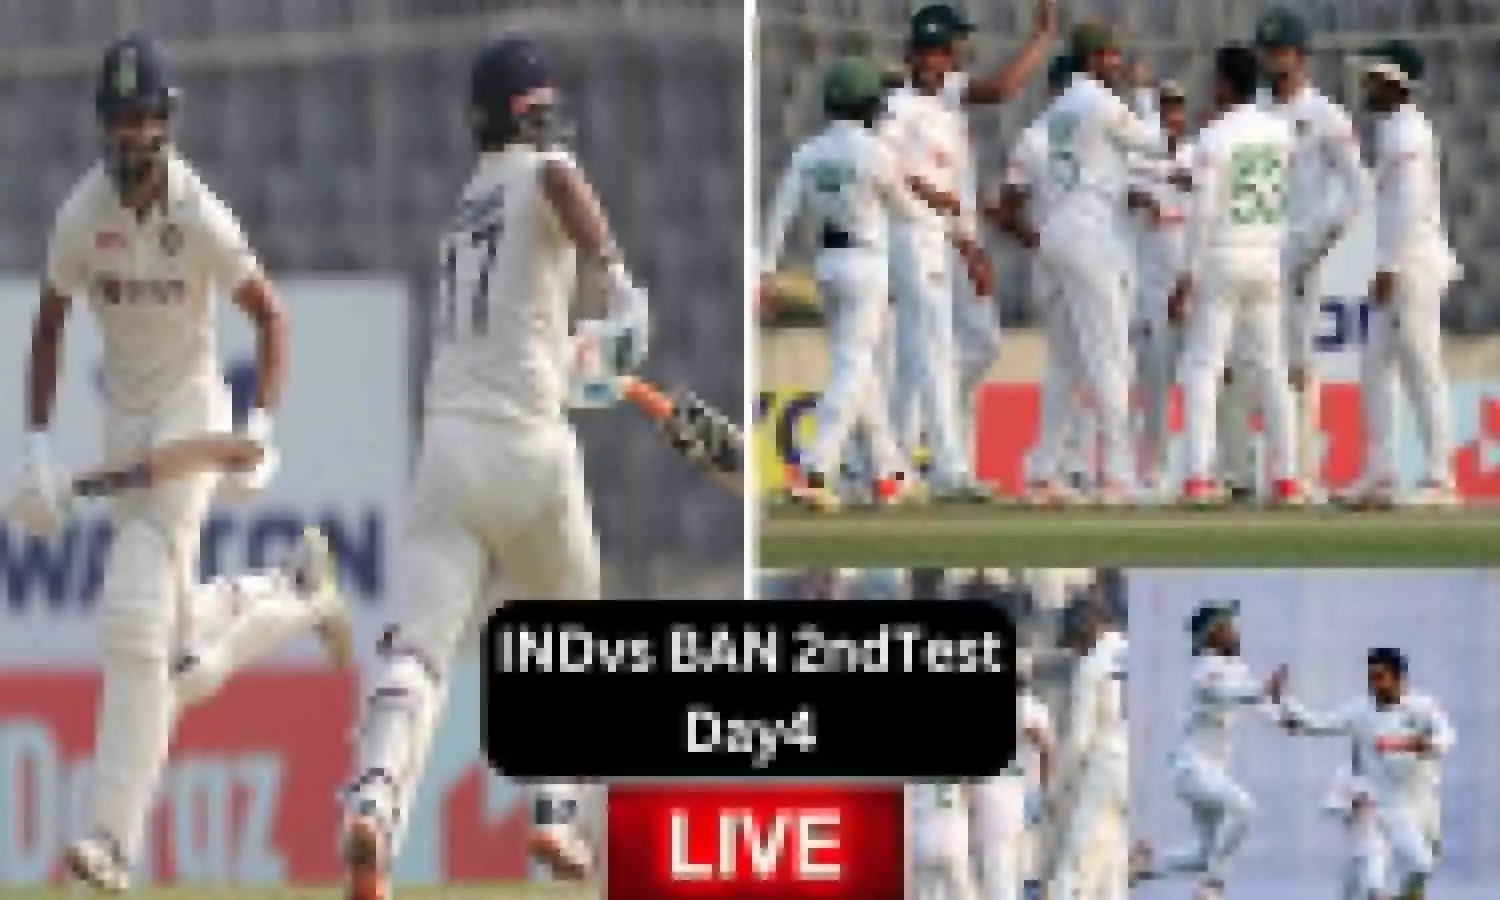 IND vs BAN 2nd Test Day 4 Live